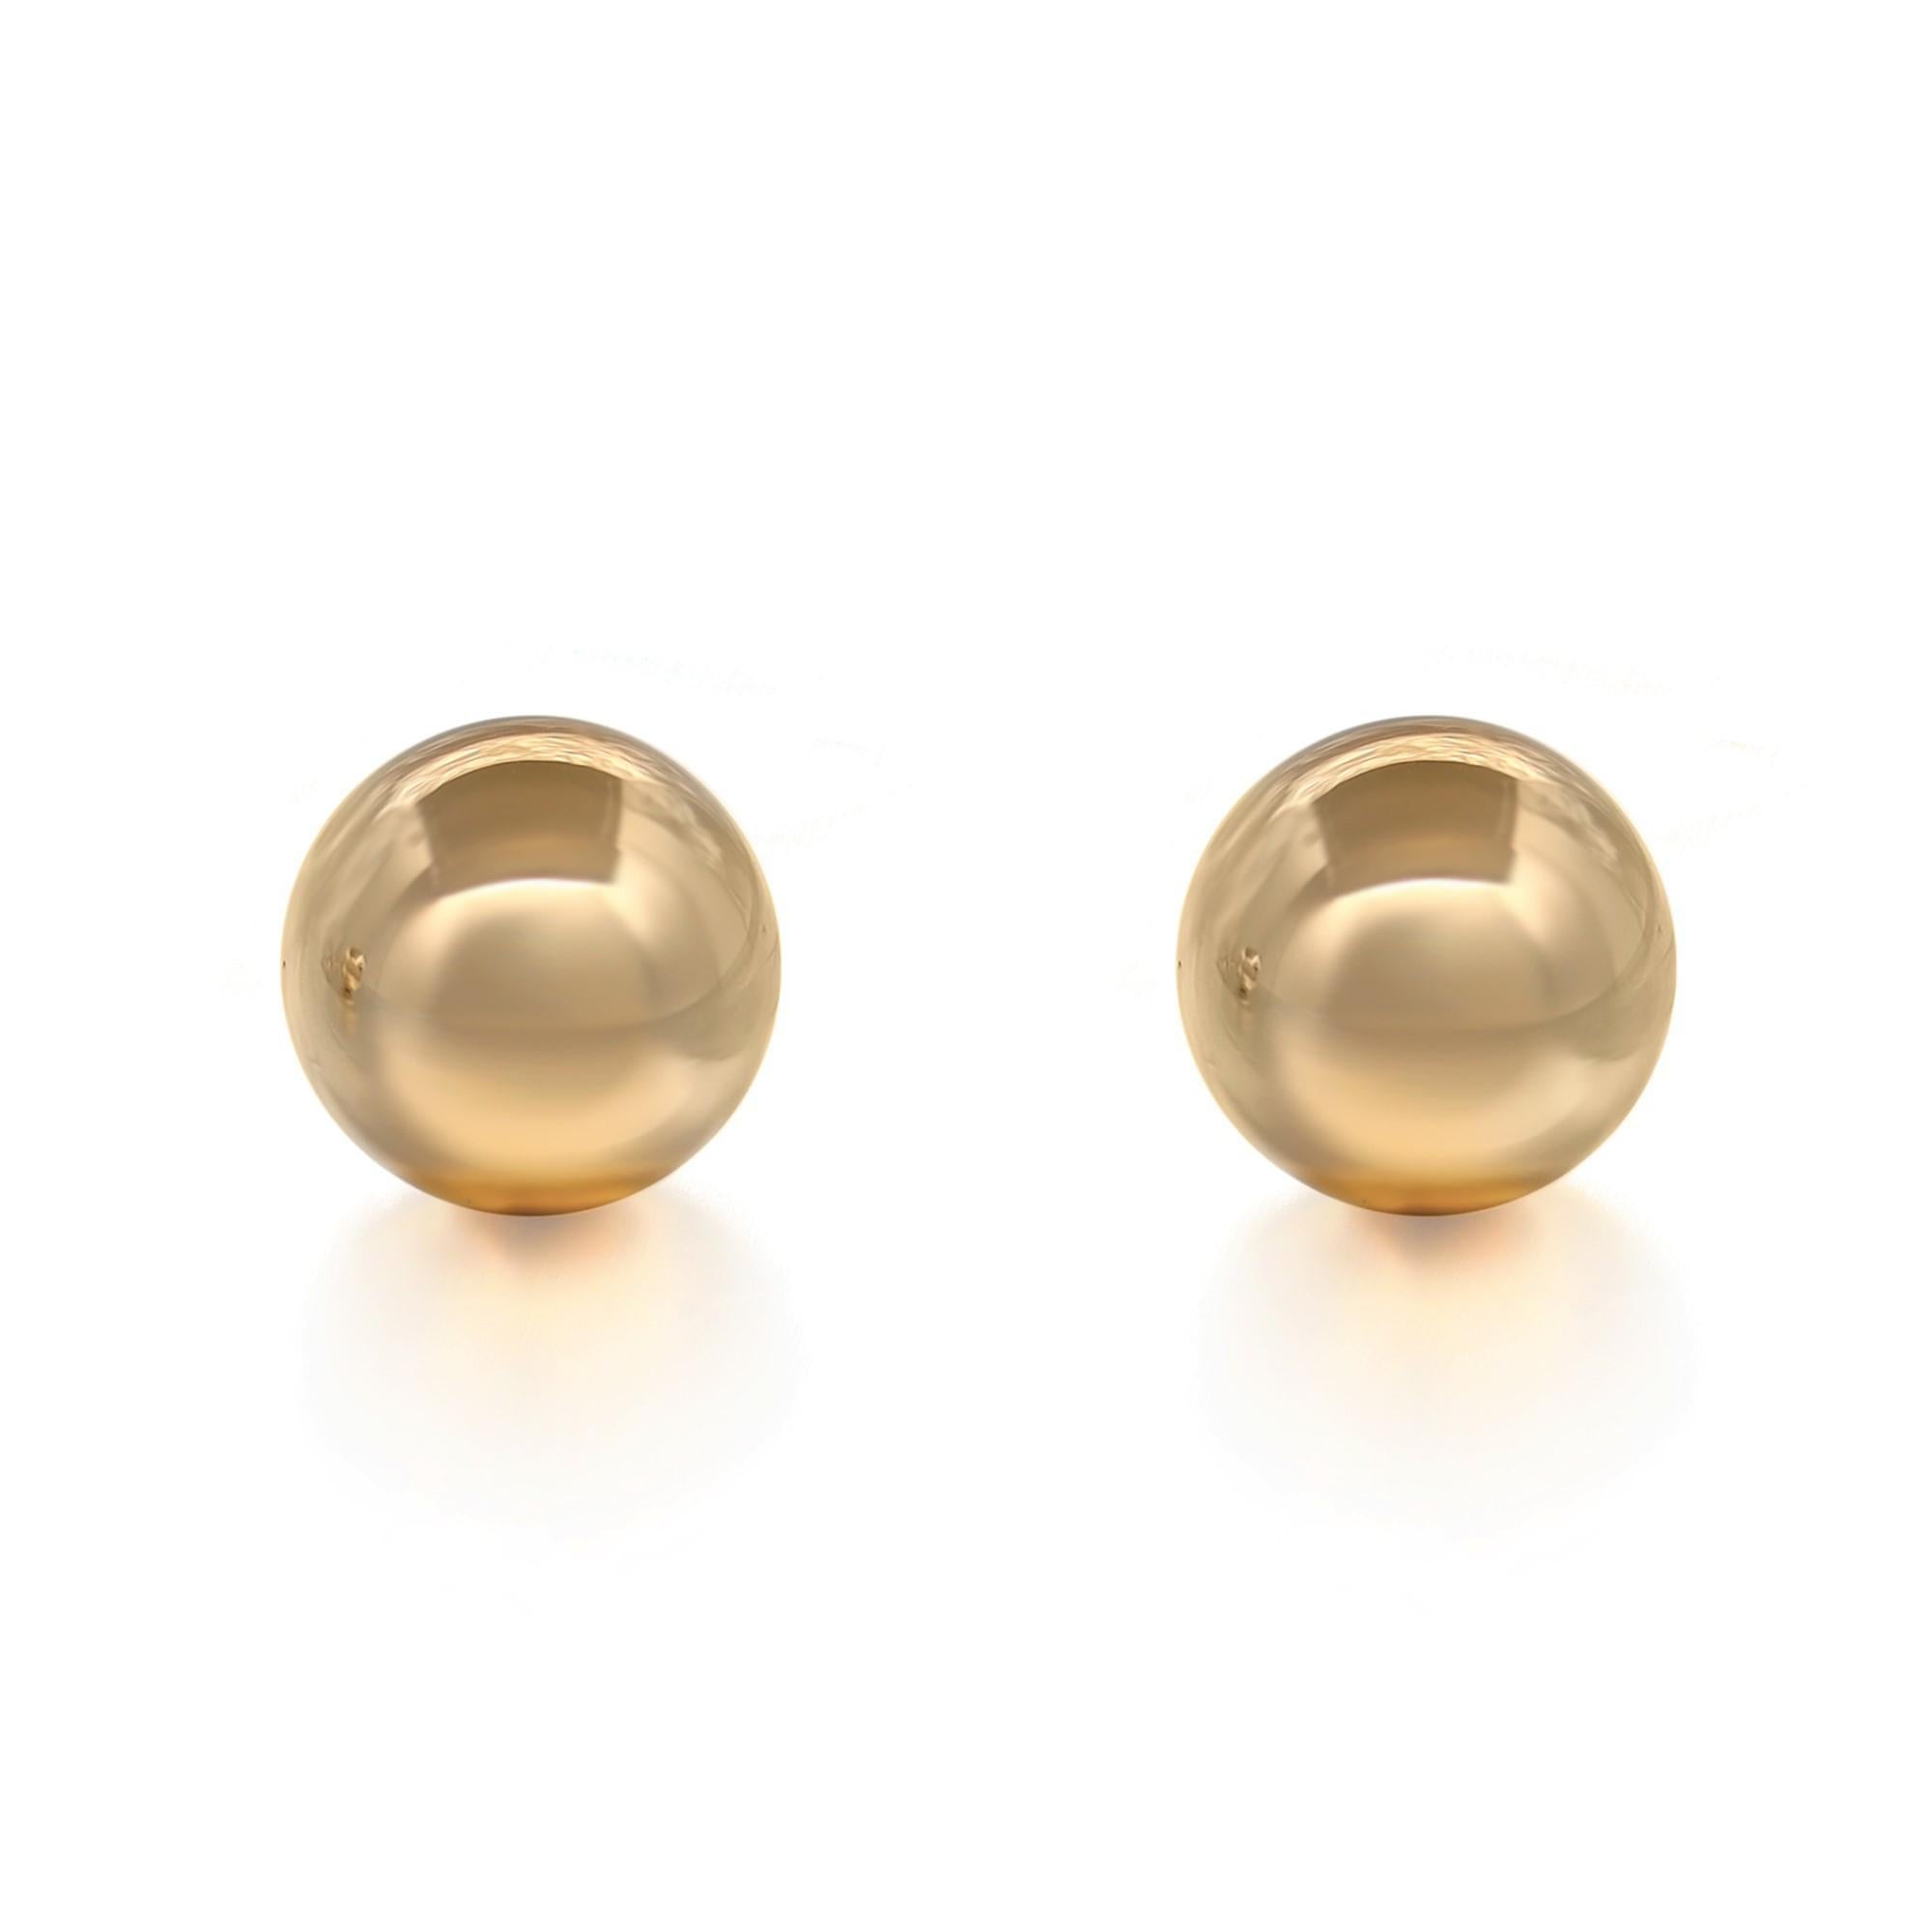 Simple and classic round ball bead shape stud earrings. These earrings are crafted in highly polished hollow 14k yellow gold for a lightweight, wearable feel. Ideal for every day wear. Secured with push back post closure. Size: 9mm. Total weight: